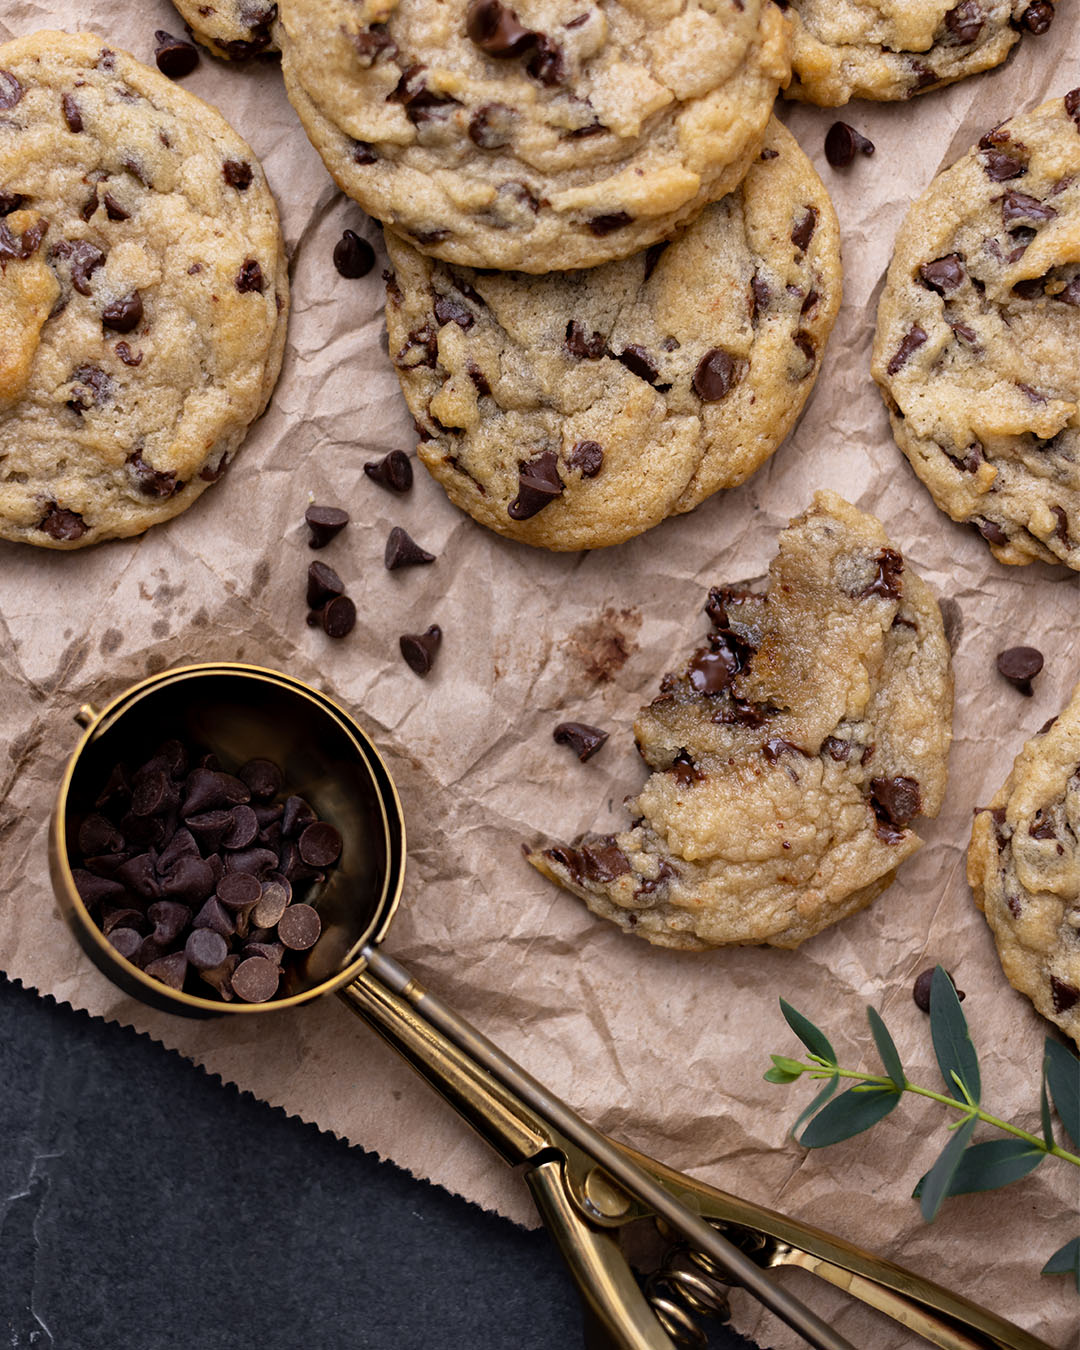 Amazingly soft and chewy chocolate chip cookies.